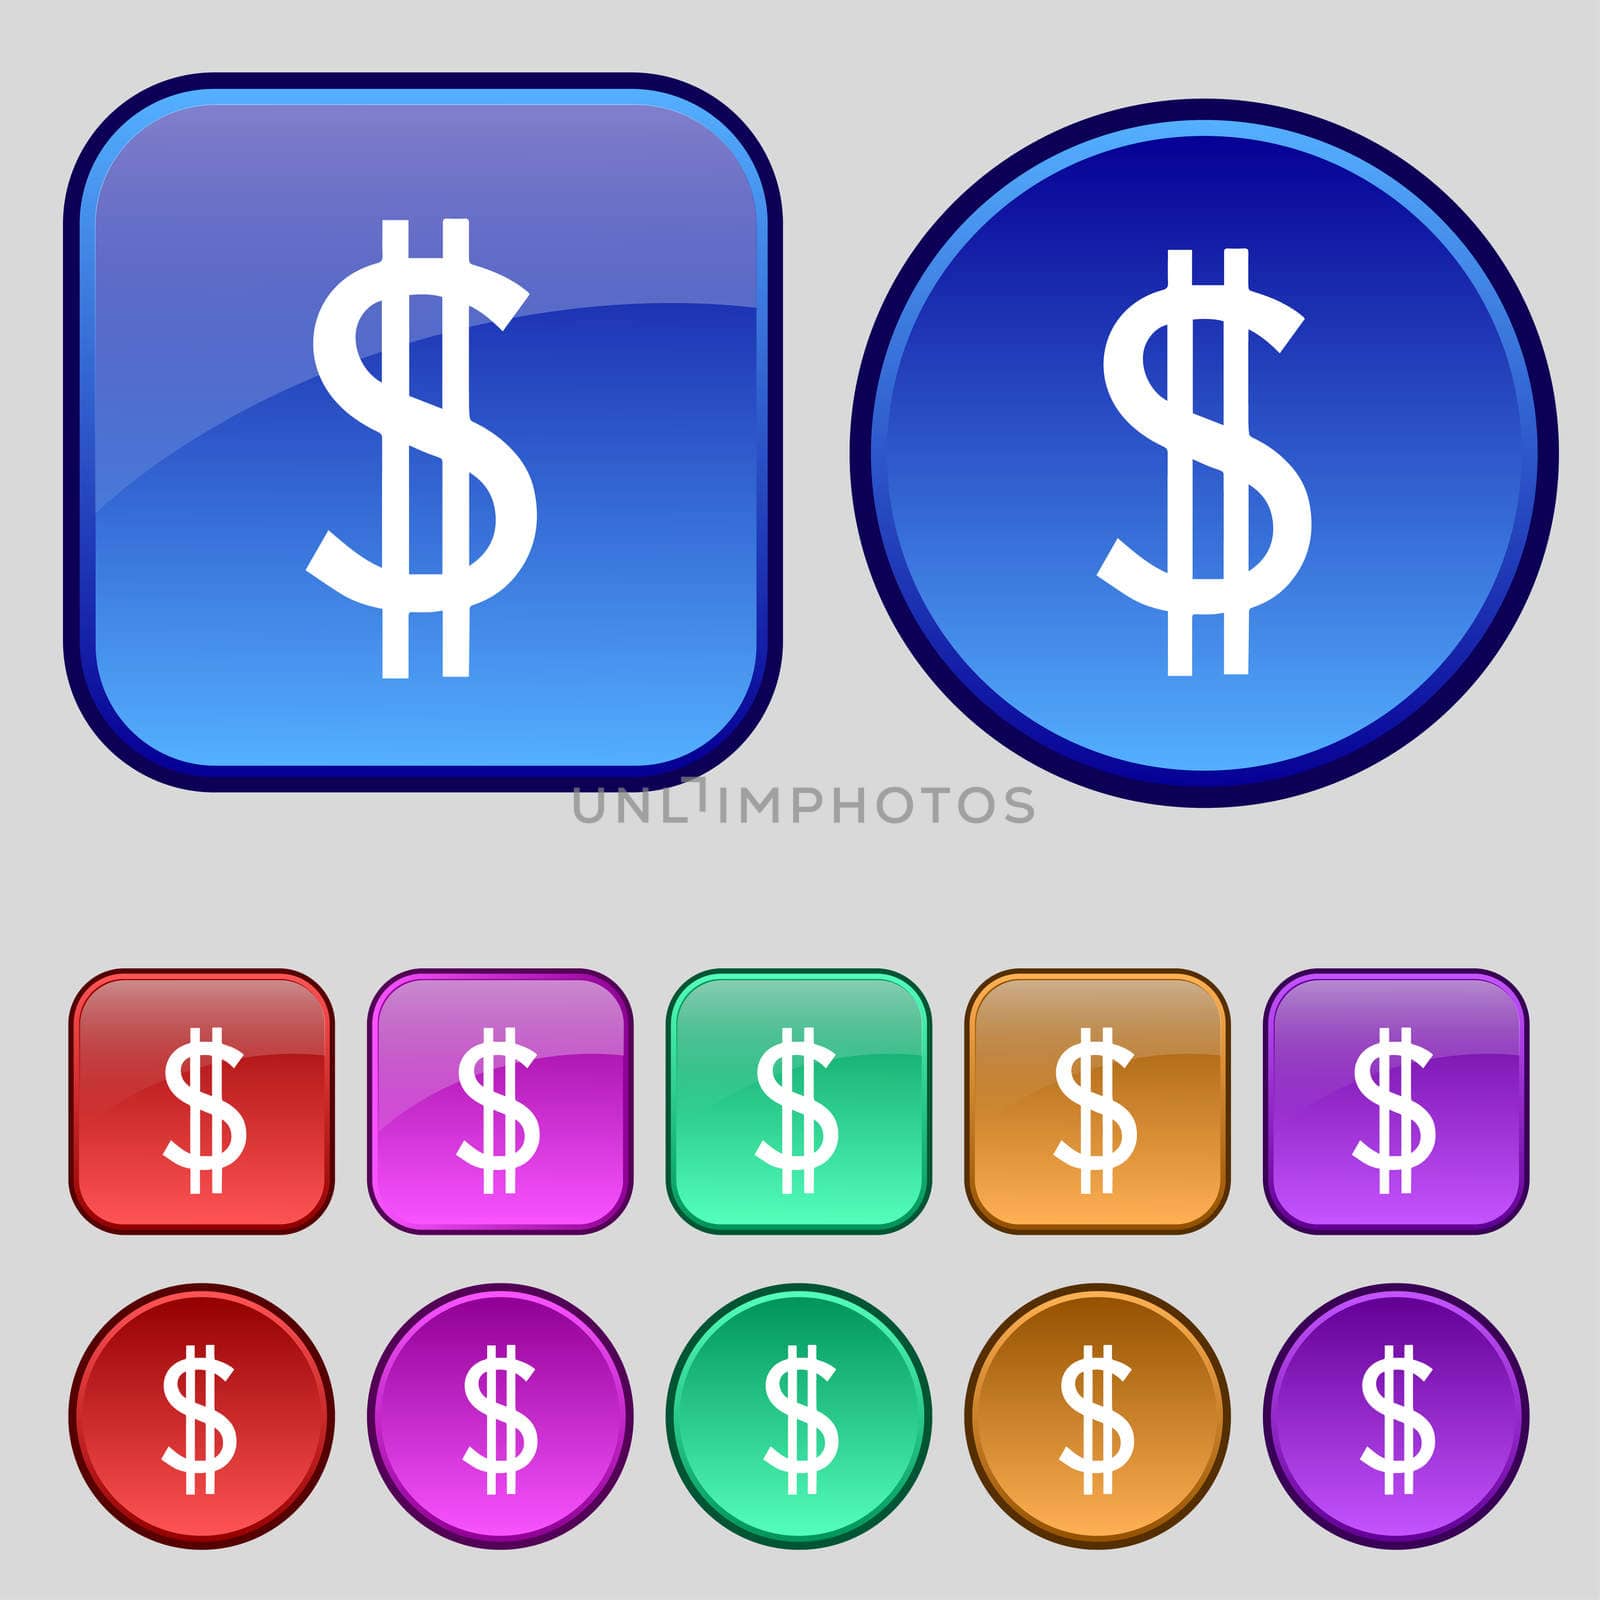 Dollars sign icon. USD currency symbol. Money label. Set of colored buttons. illustration